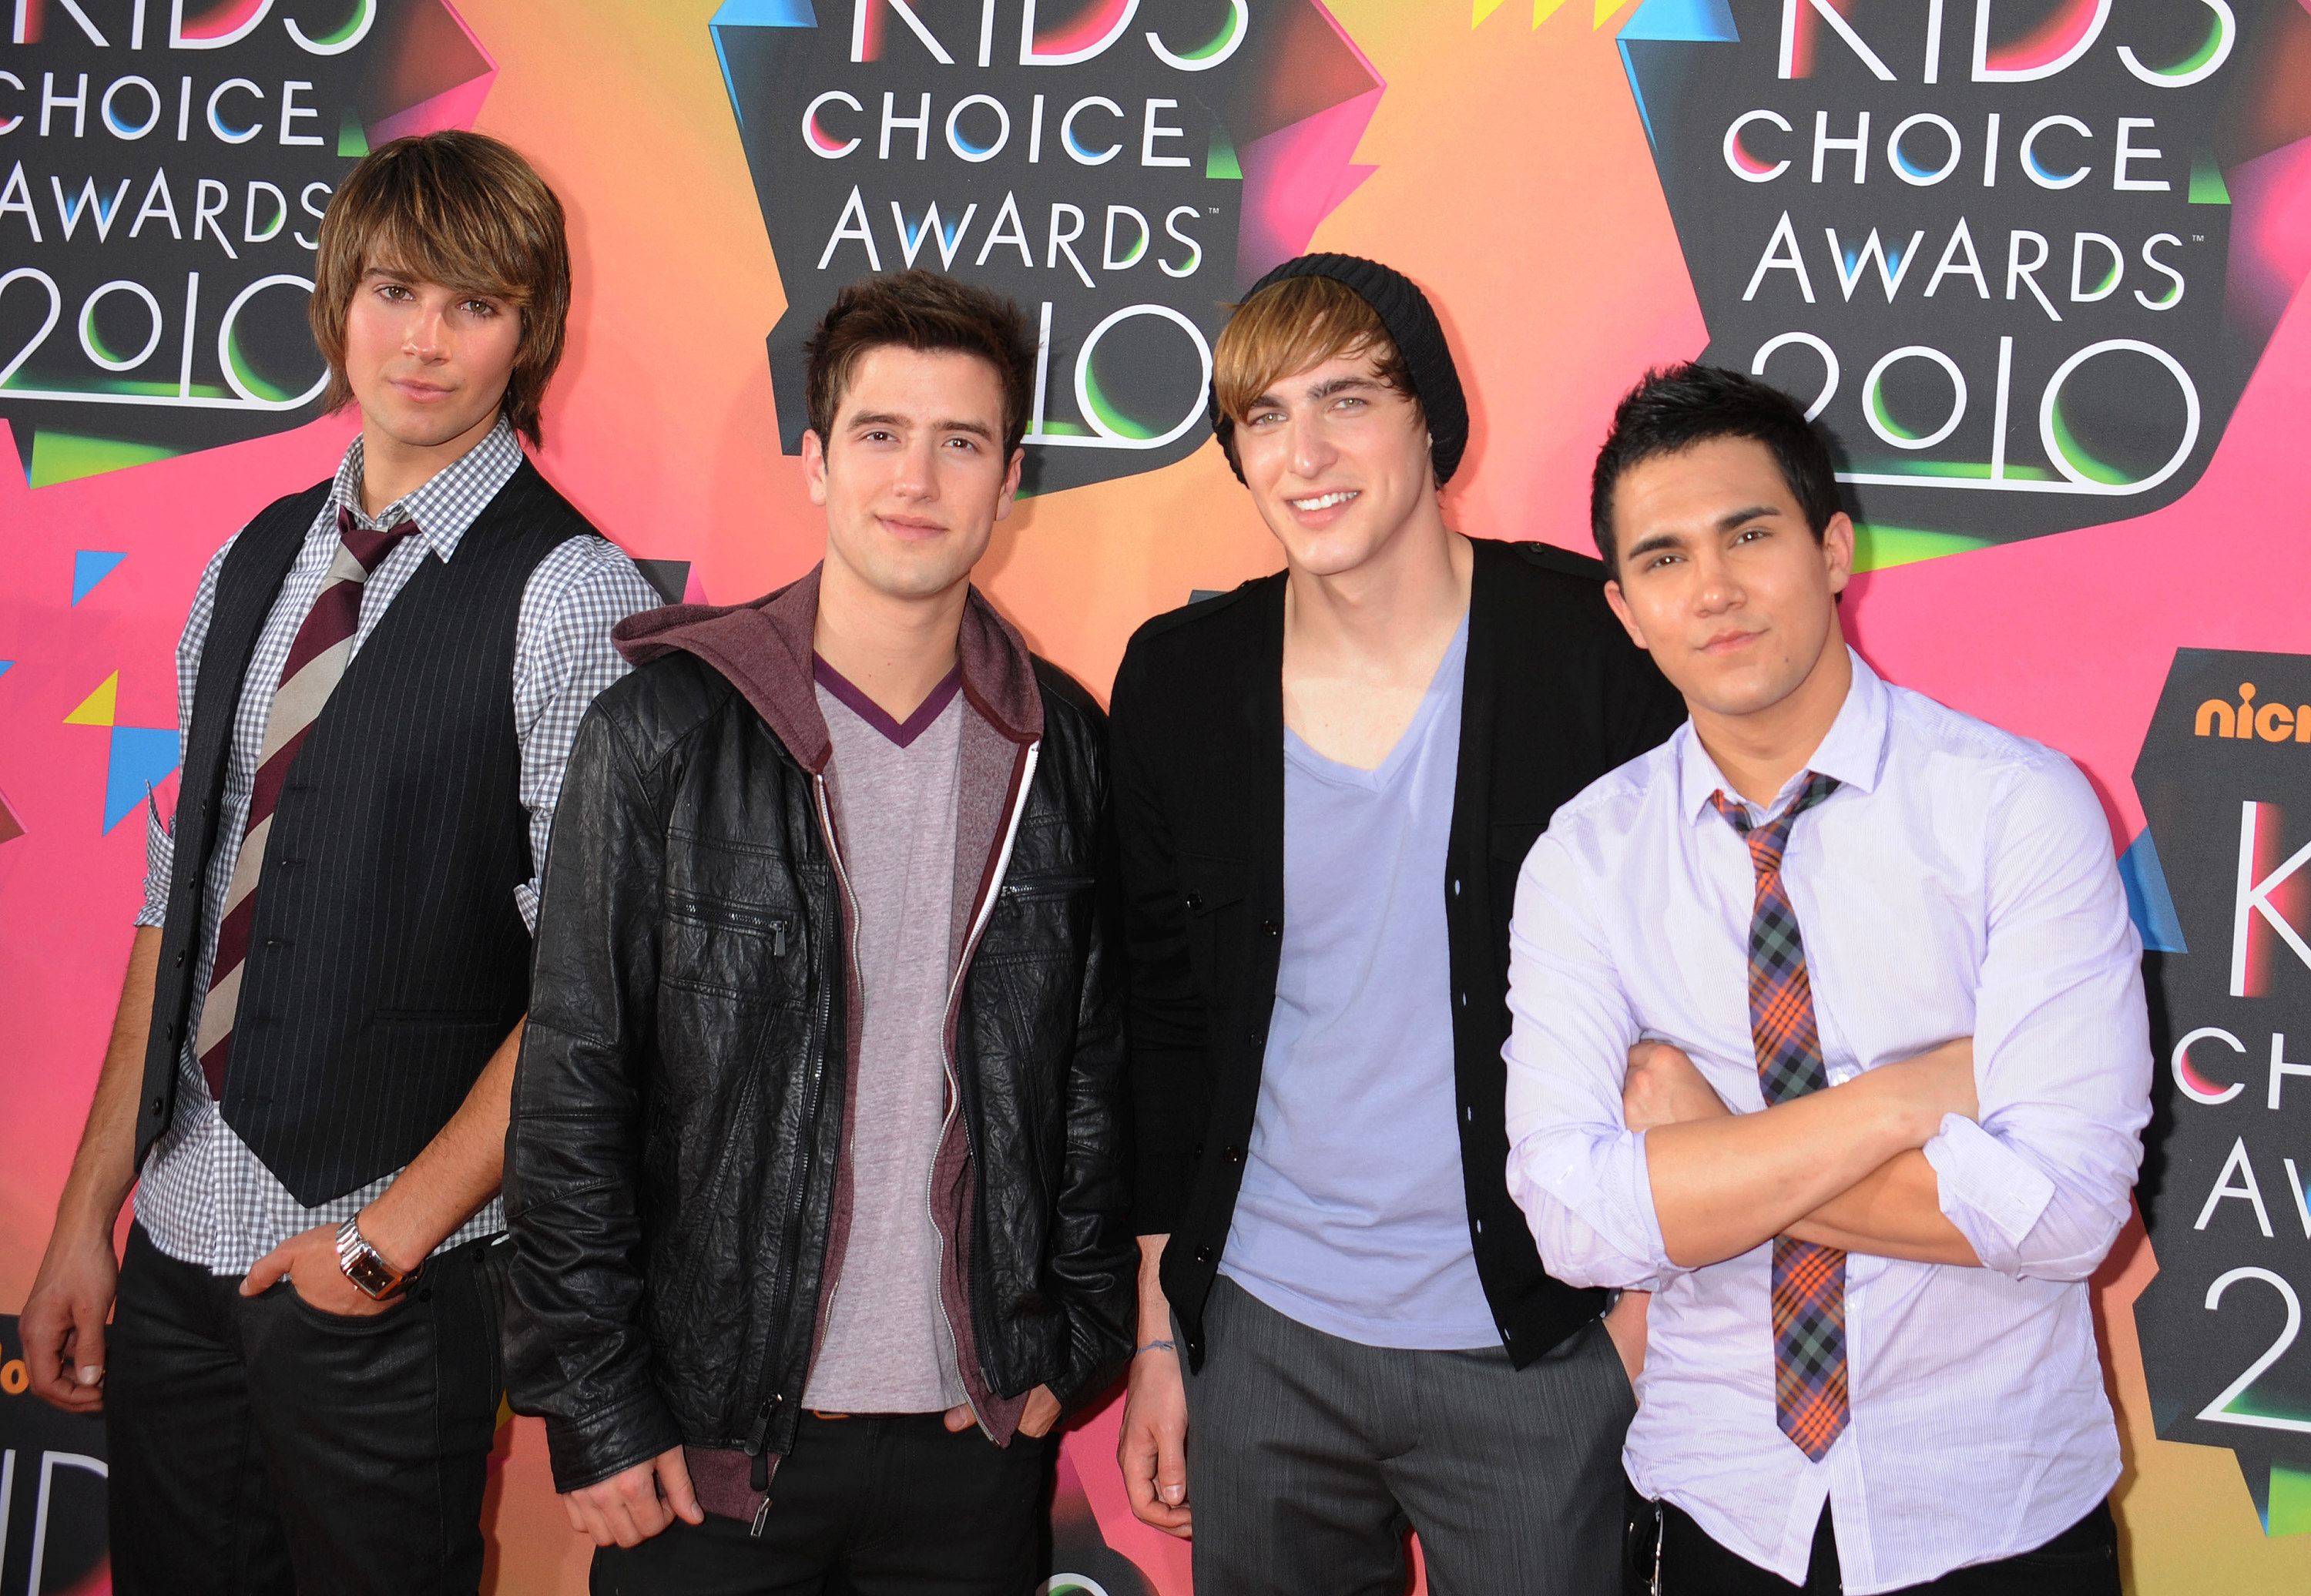 Four band members dressed casually in various vests, jackets, shirts, and ties